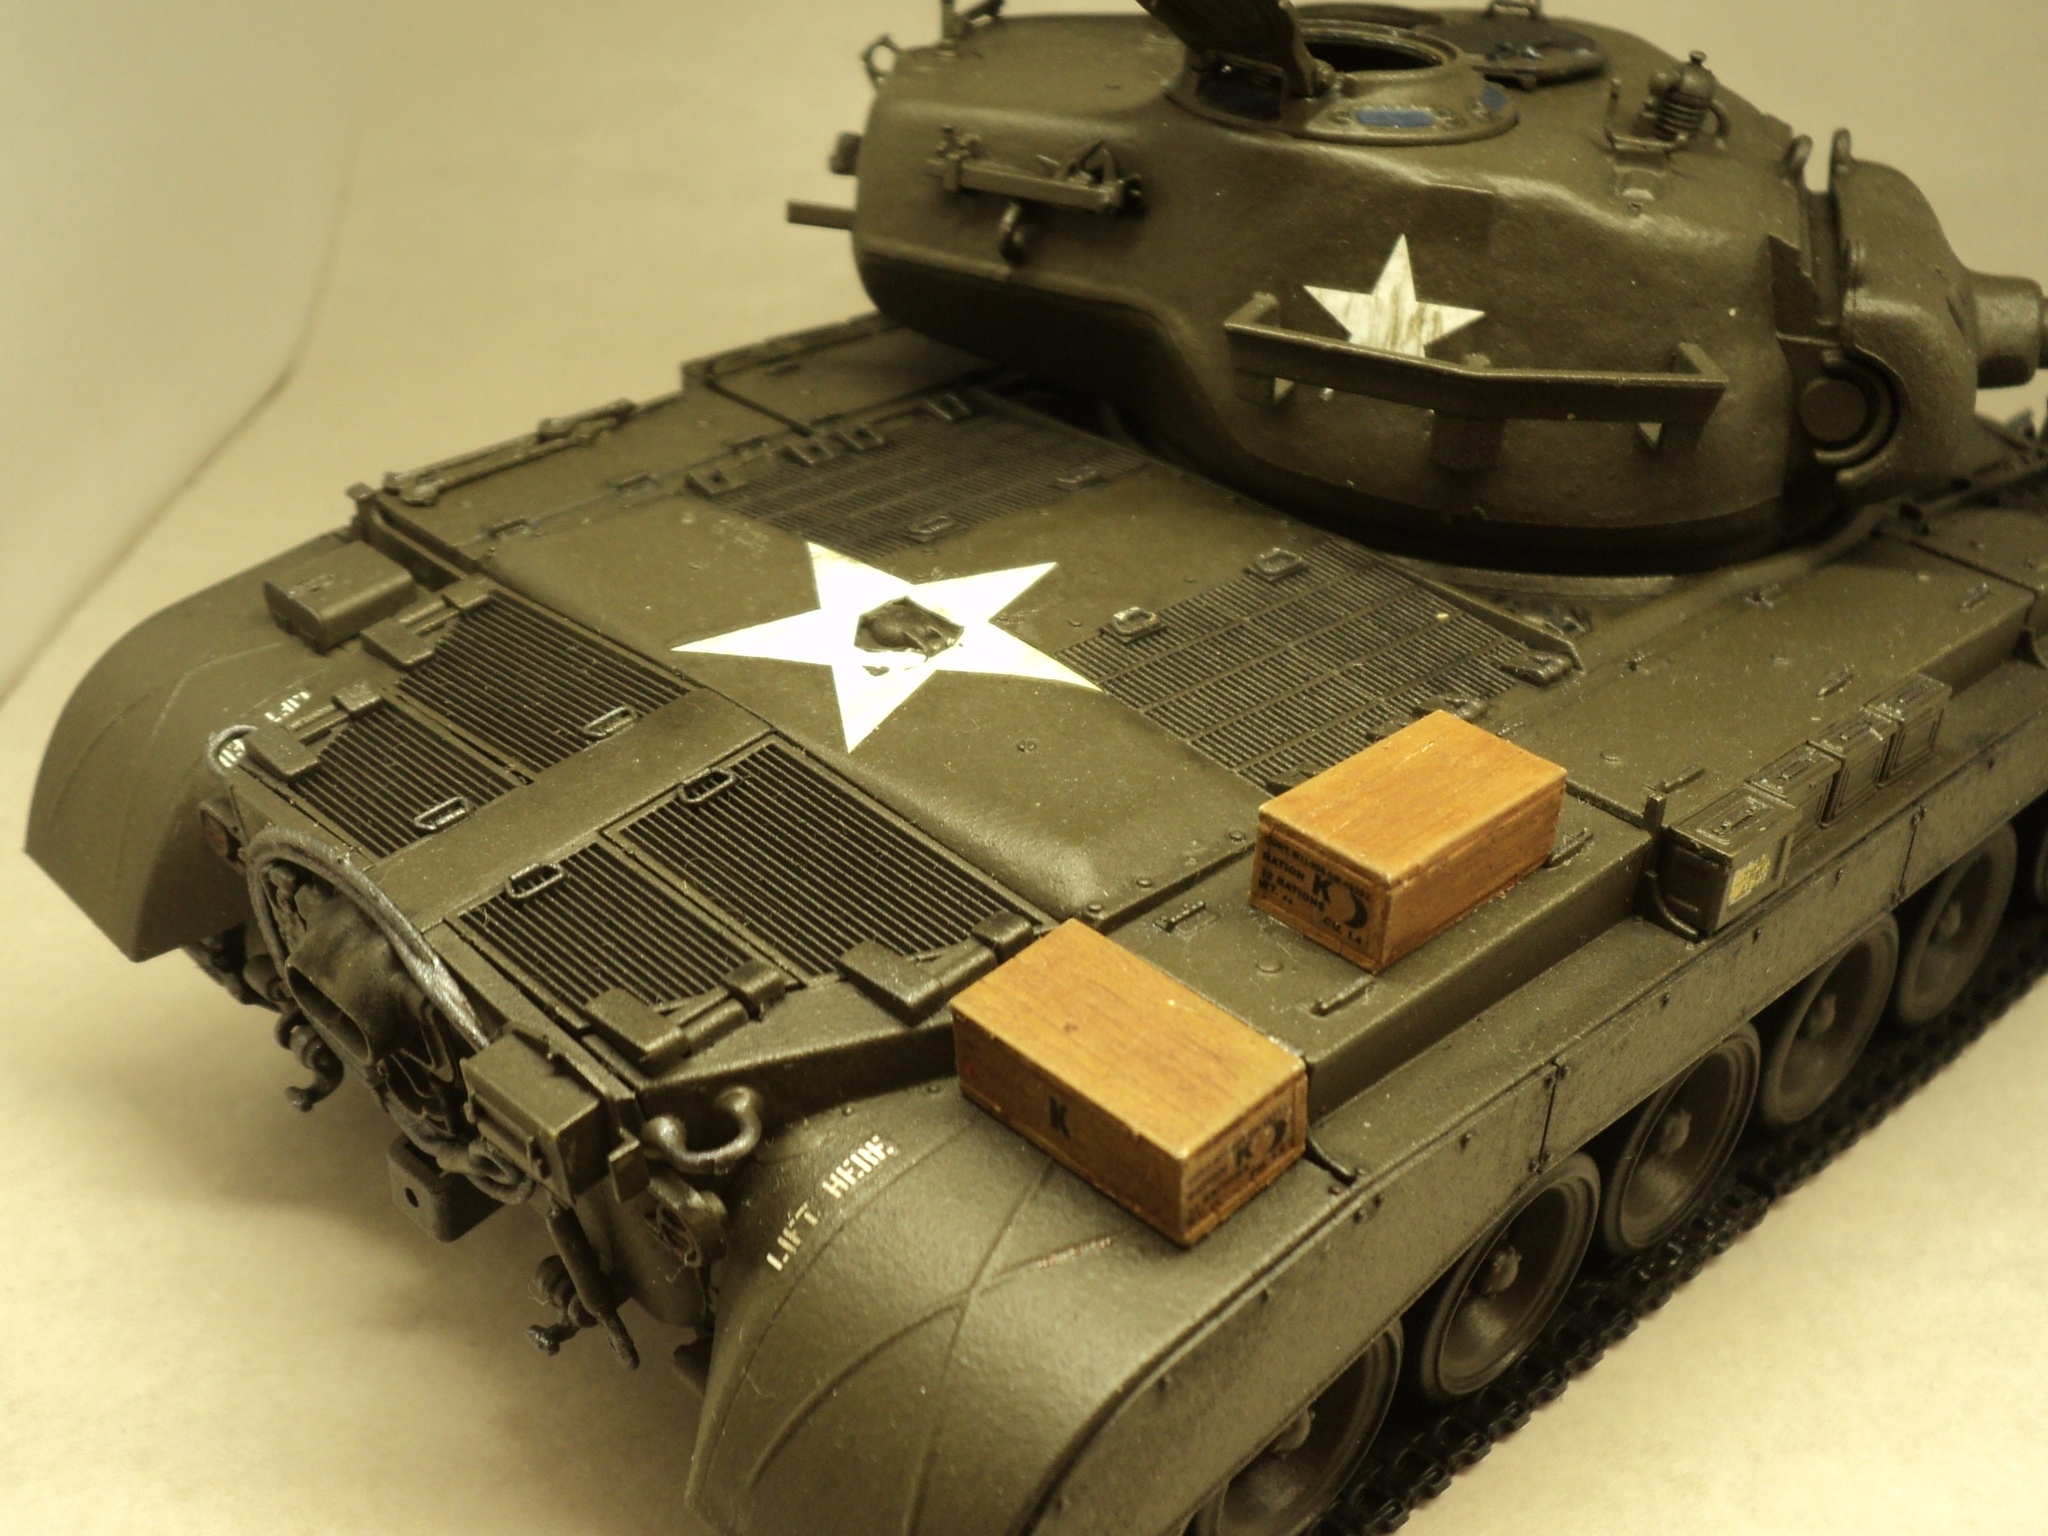 Heavy/medium tank M26 Pershing, 1/35, Tamiya - My, Stand modeling, Modeling, Scale model, Military equipment, Armored vehicles, Tanks, Scale 1:35, The Second World War, Collection, Creation, Hobby, Prefabricated model, Longpost